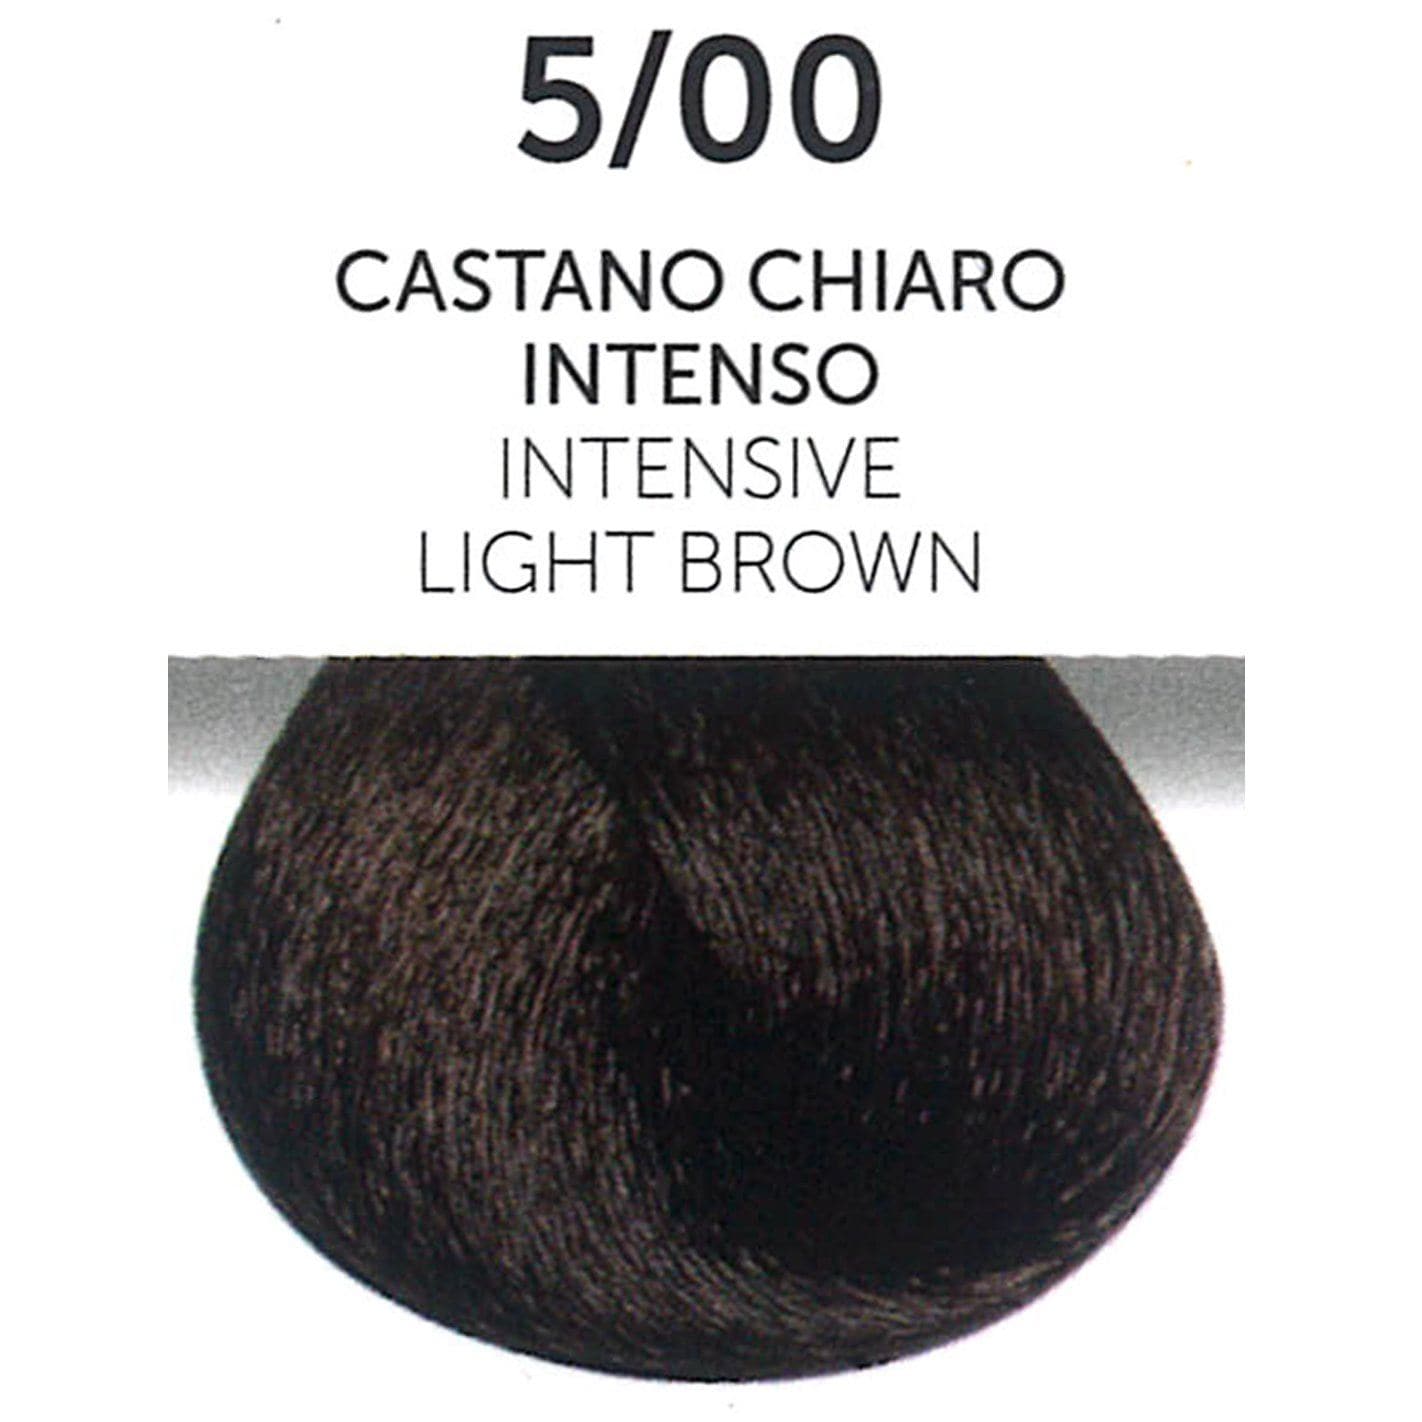 5/00 Intensive Light Brown | Permanent Hair Color | Perlacolor HAIR COLOR OYSTER 